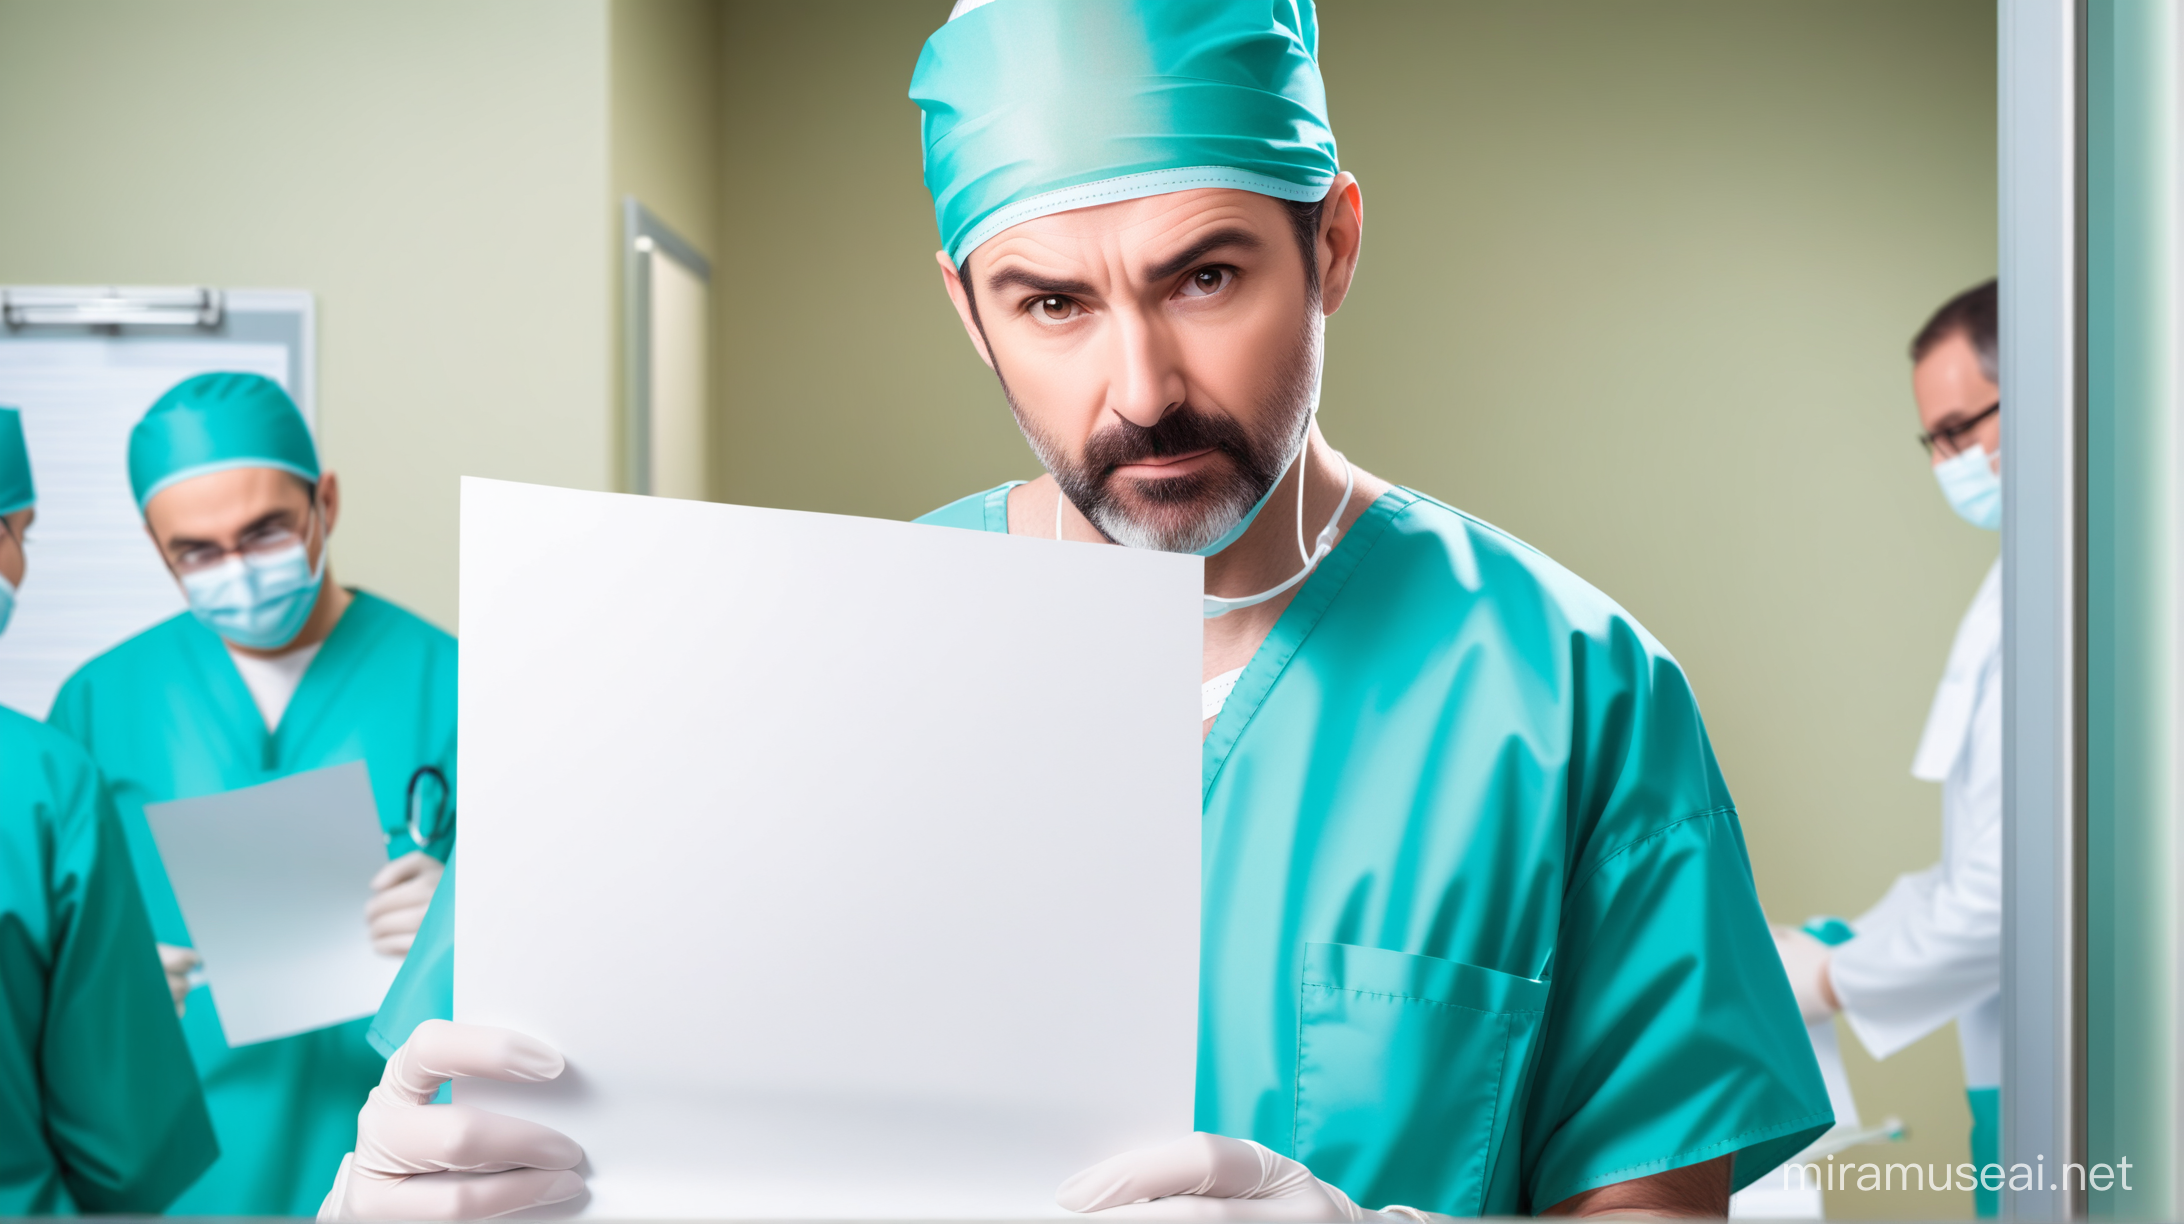 middle aged surgeon standing and holding a white paper in his hand. He looks at this paper anxiously. We see the surgeon from behind